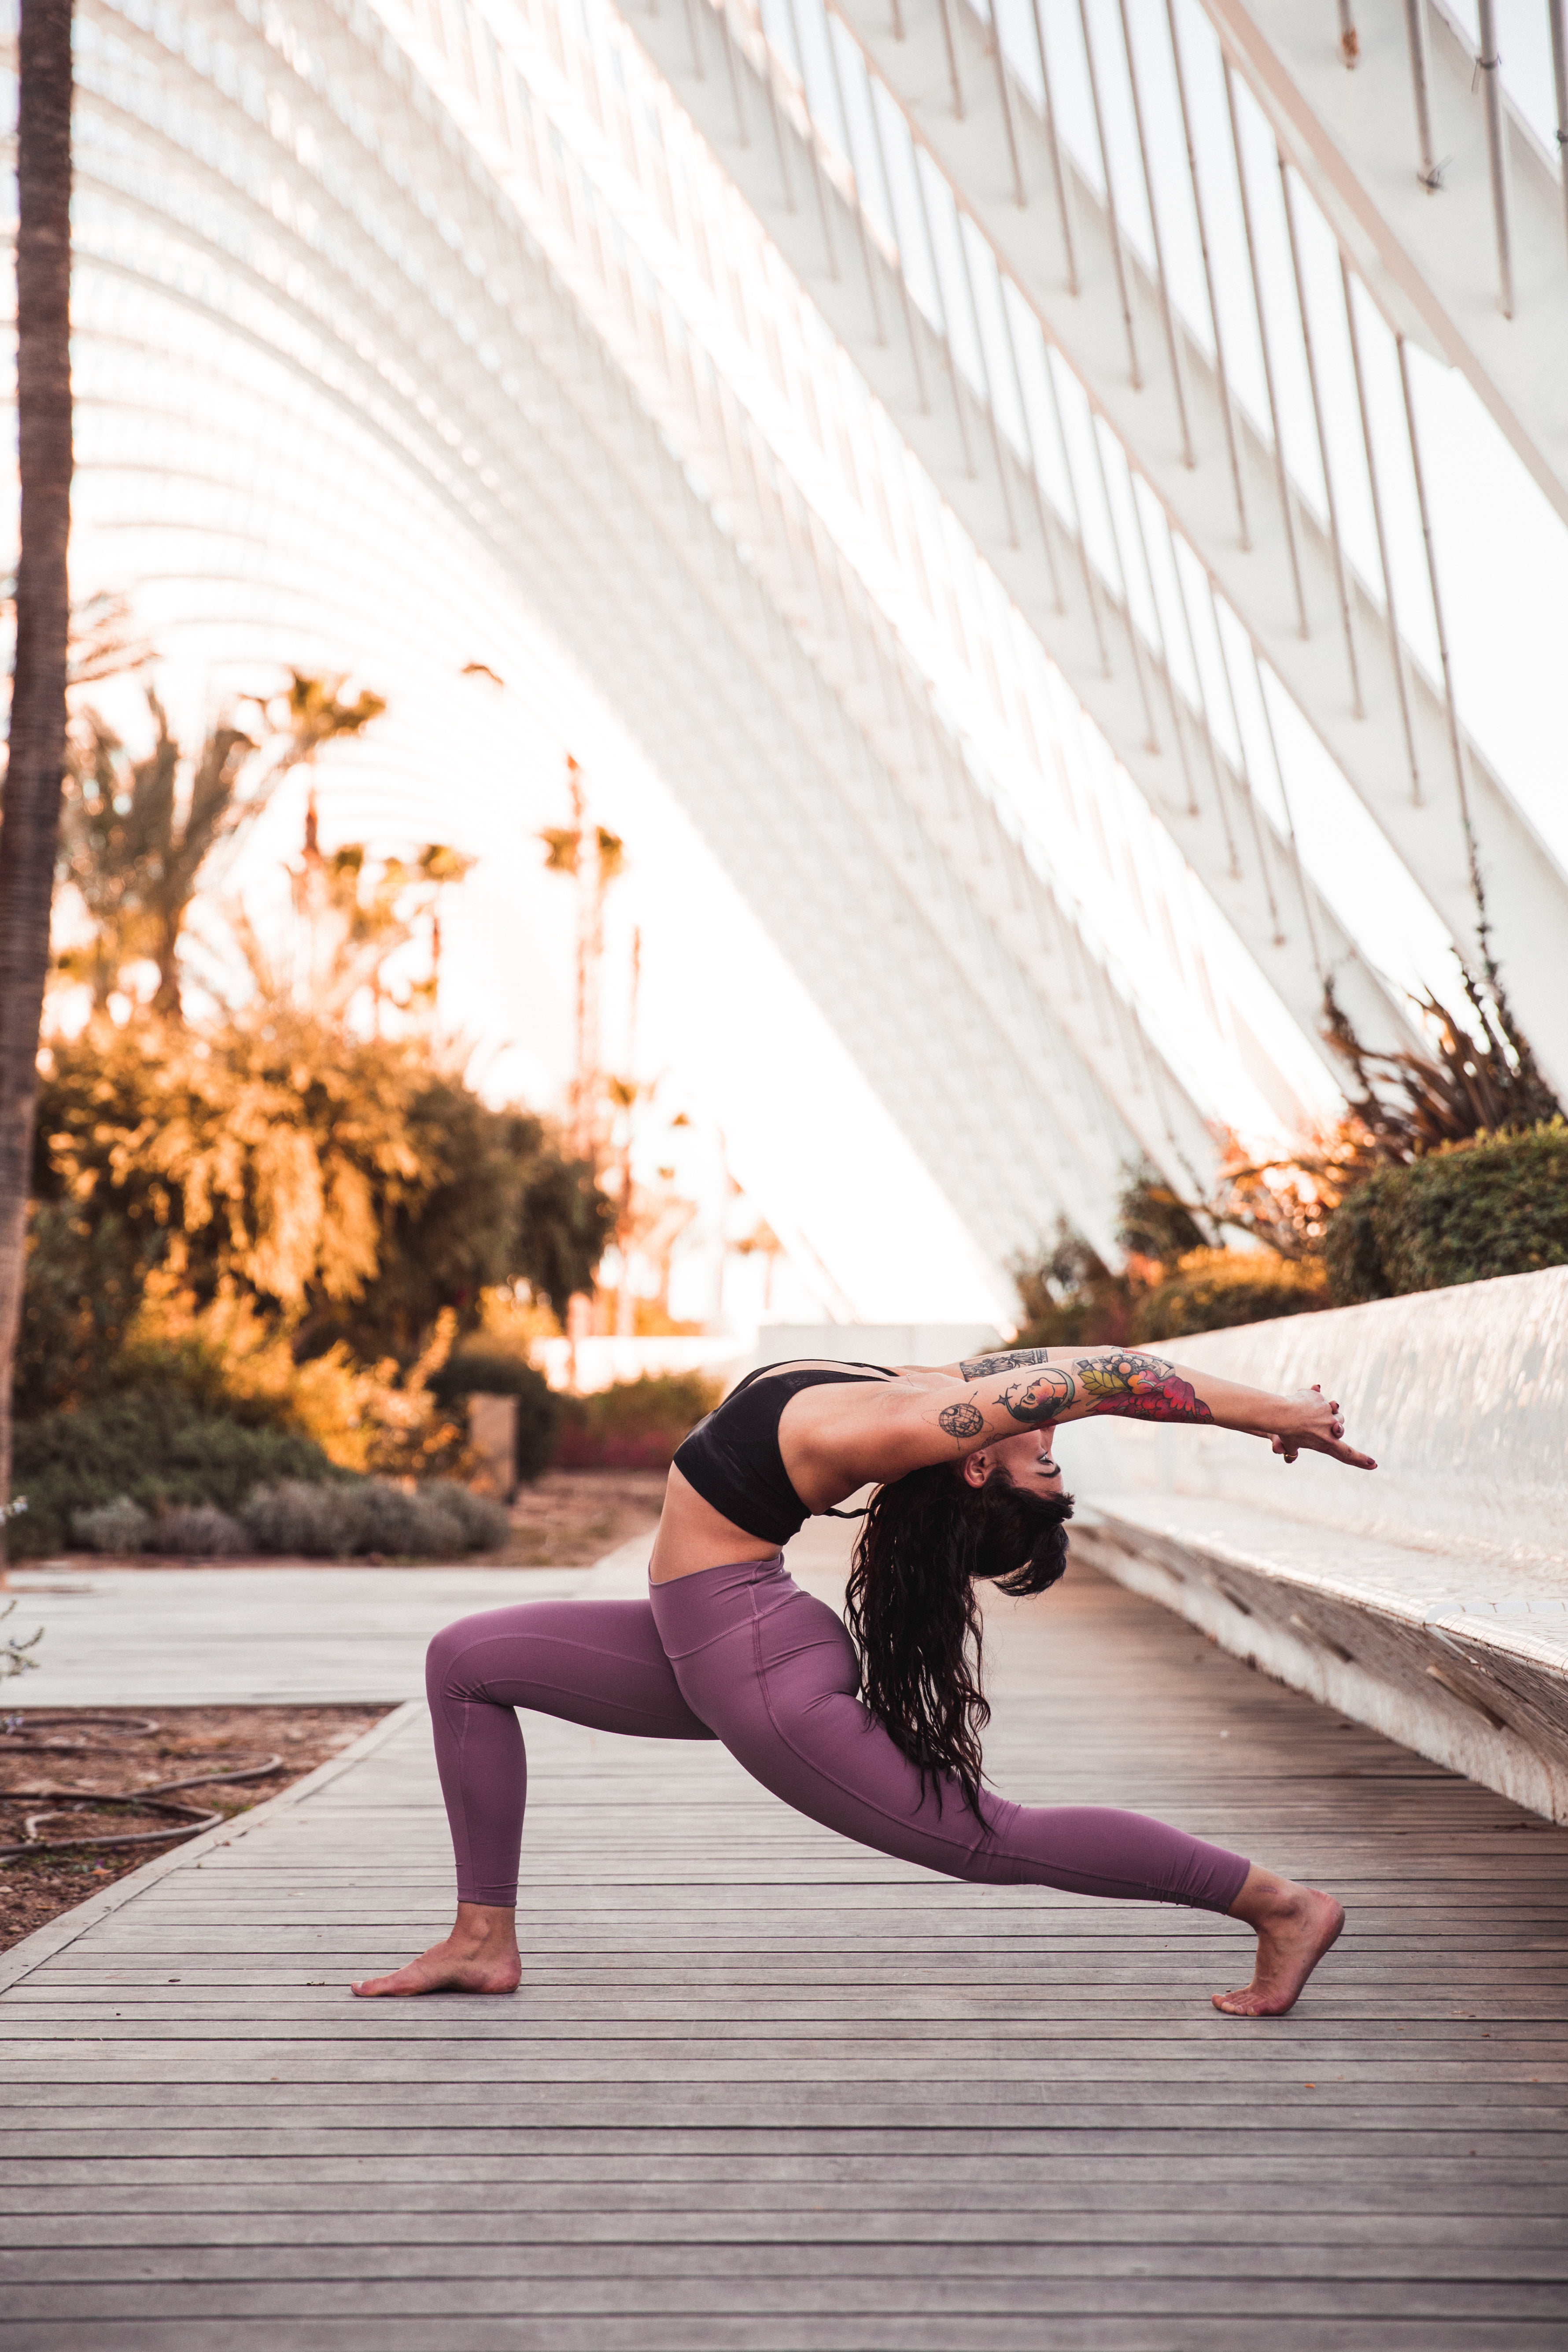 500+ Yoga Pose Pictures [HD] | Download Free Images on Unsplash